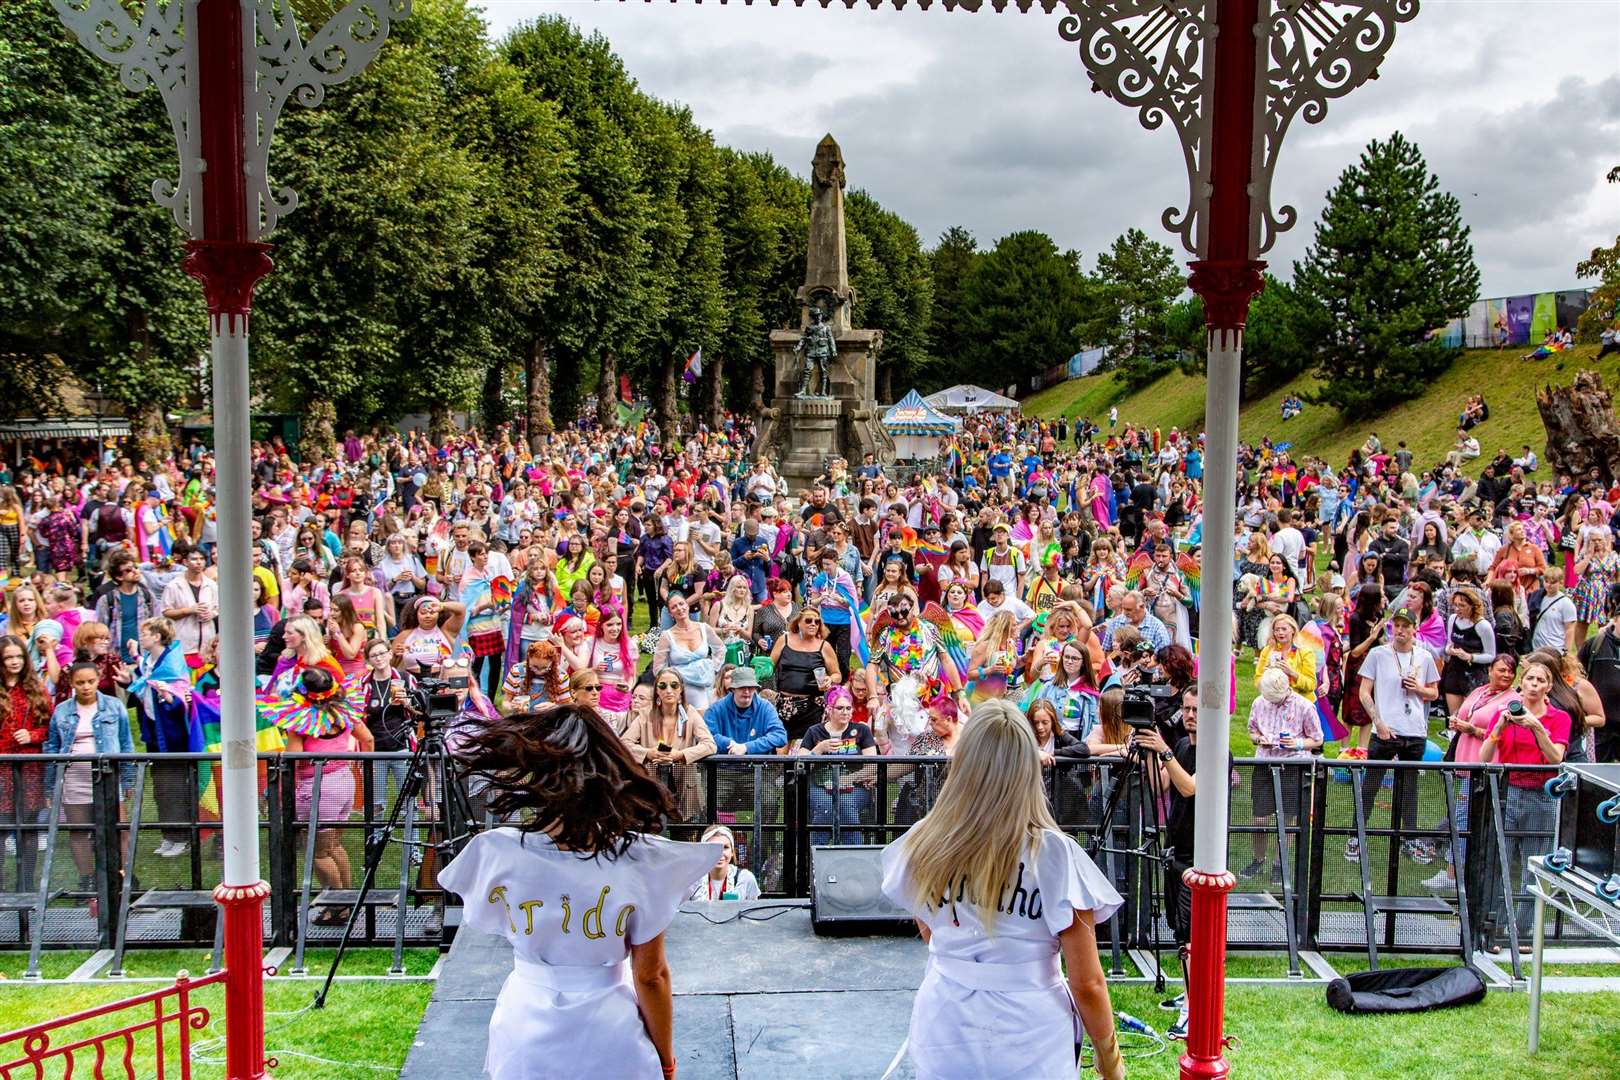 Huge crowds are expected in Dane John Gardens for Canterbury Pride this weekend. Picture: Canterbury Pride